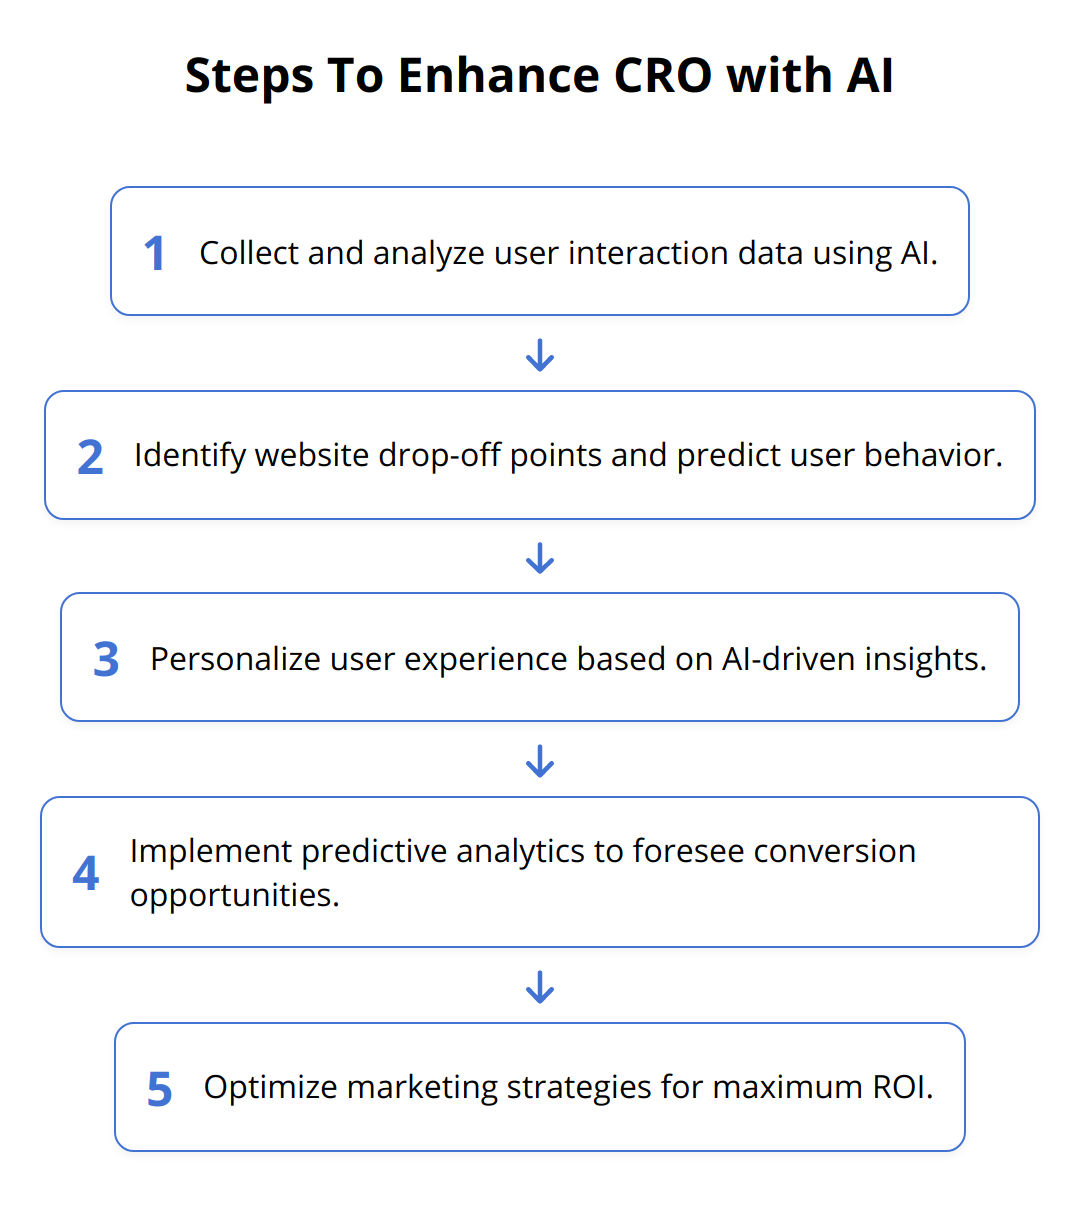 Flow Chart - Steps To Enhance CRO with AI